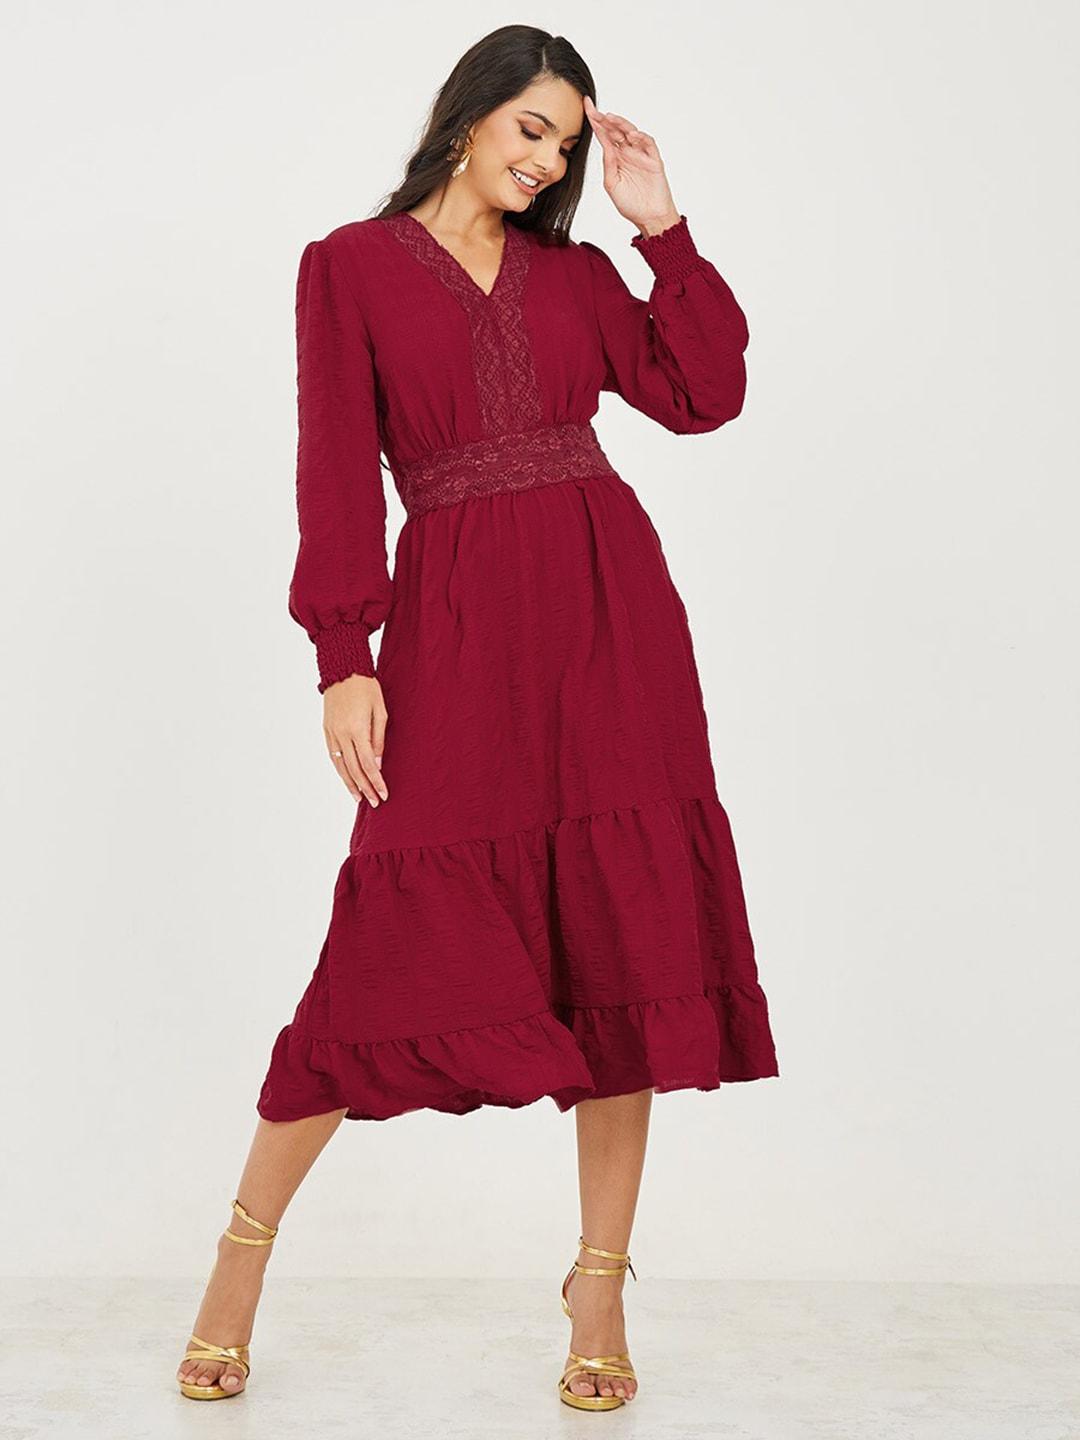 styli v-neck puff sleeves tiered lace inserts fit & flare dress